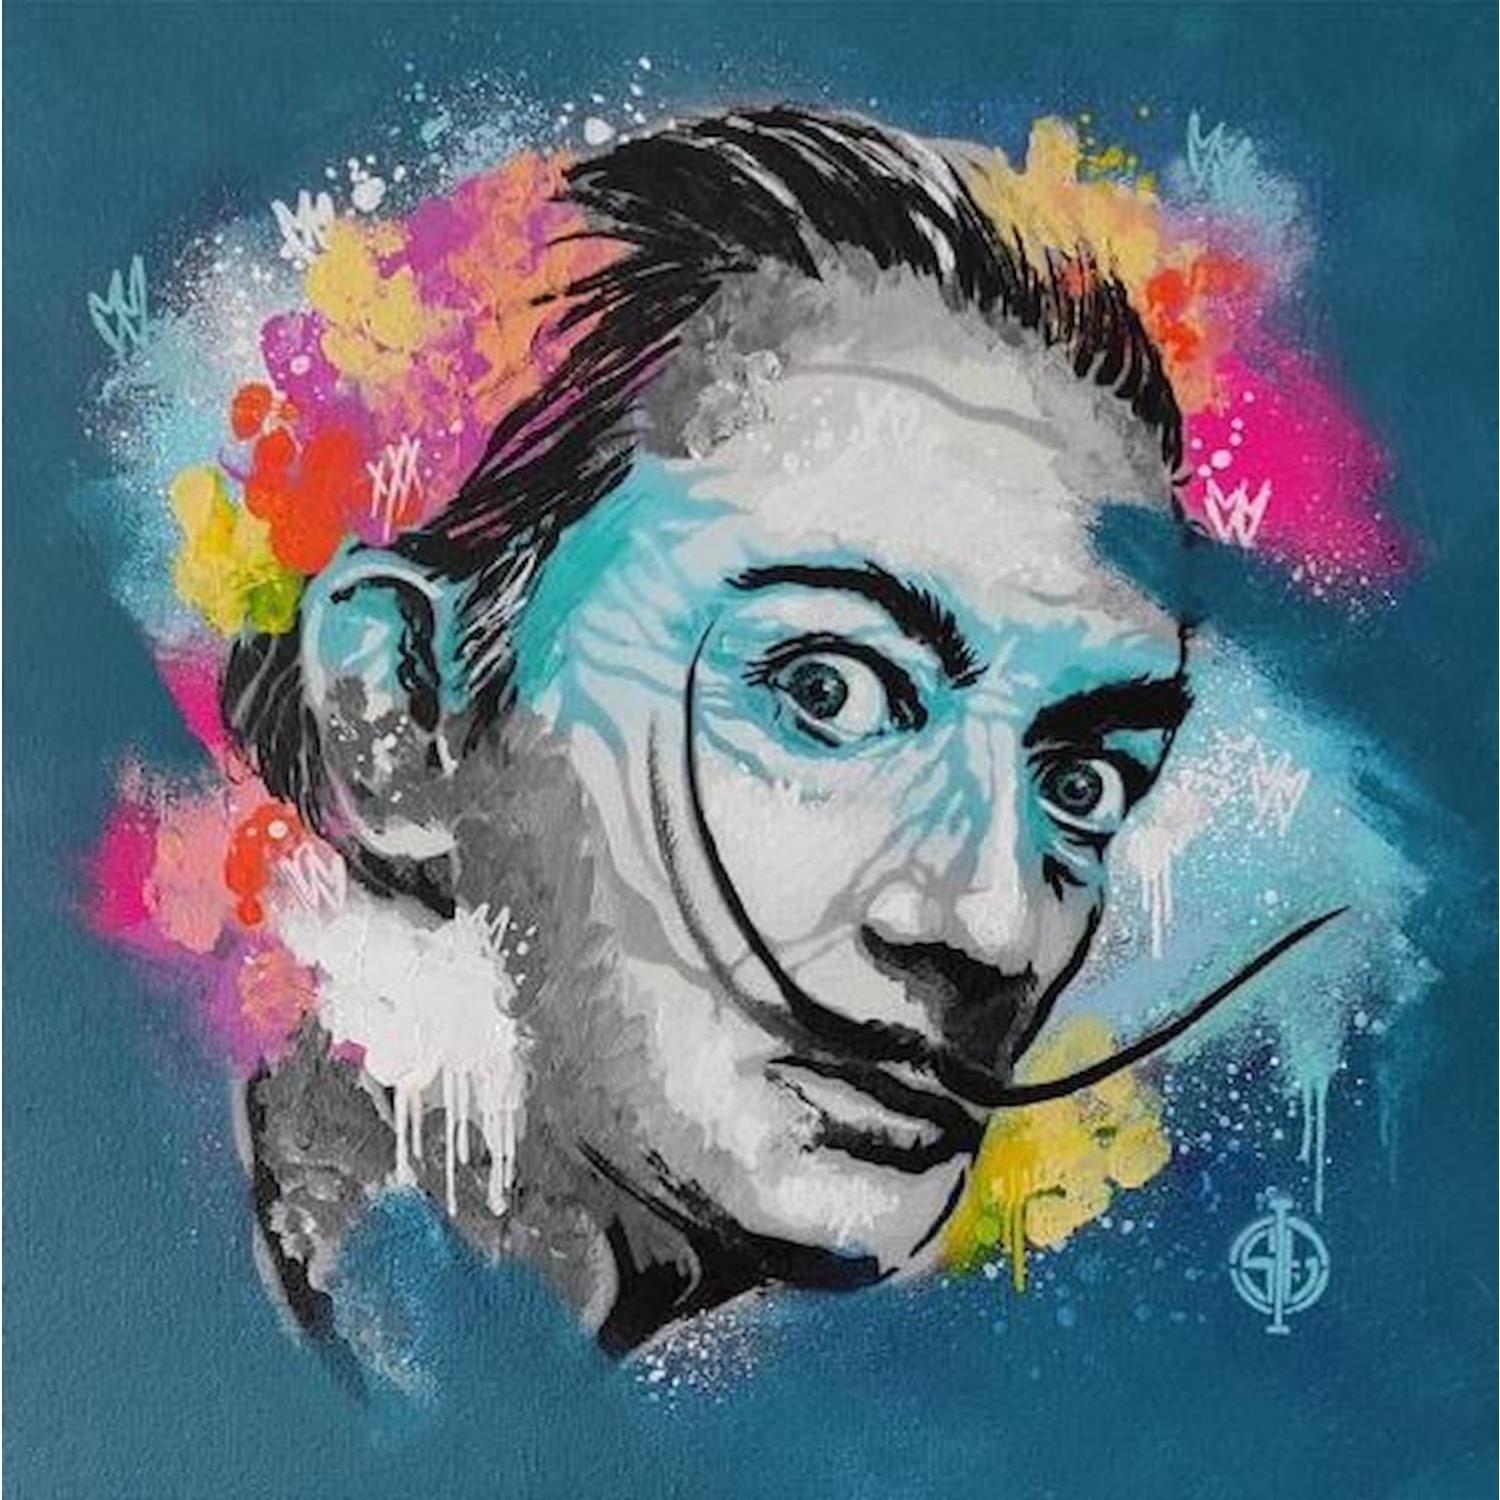 ▷ Painting Salvador Dali by Sufyr